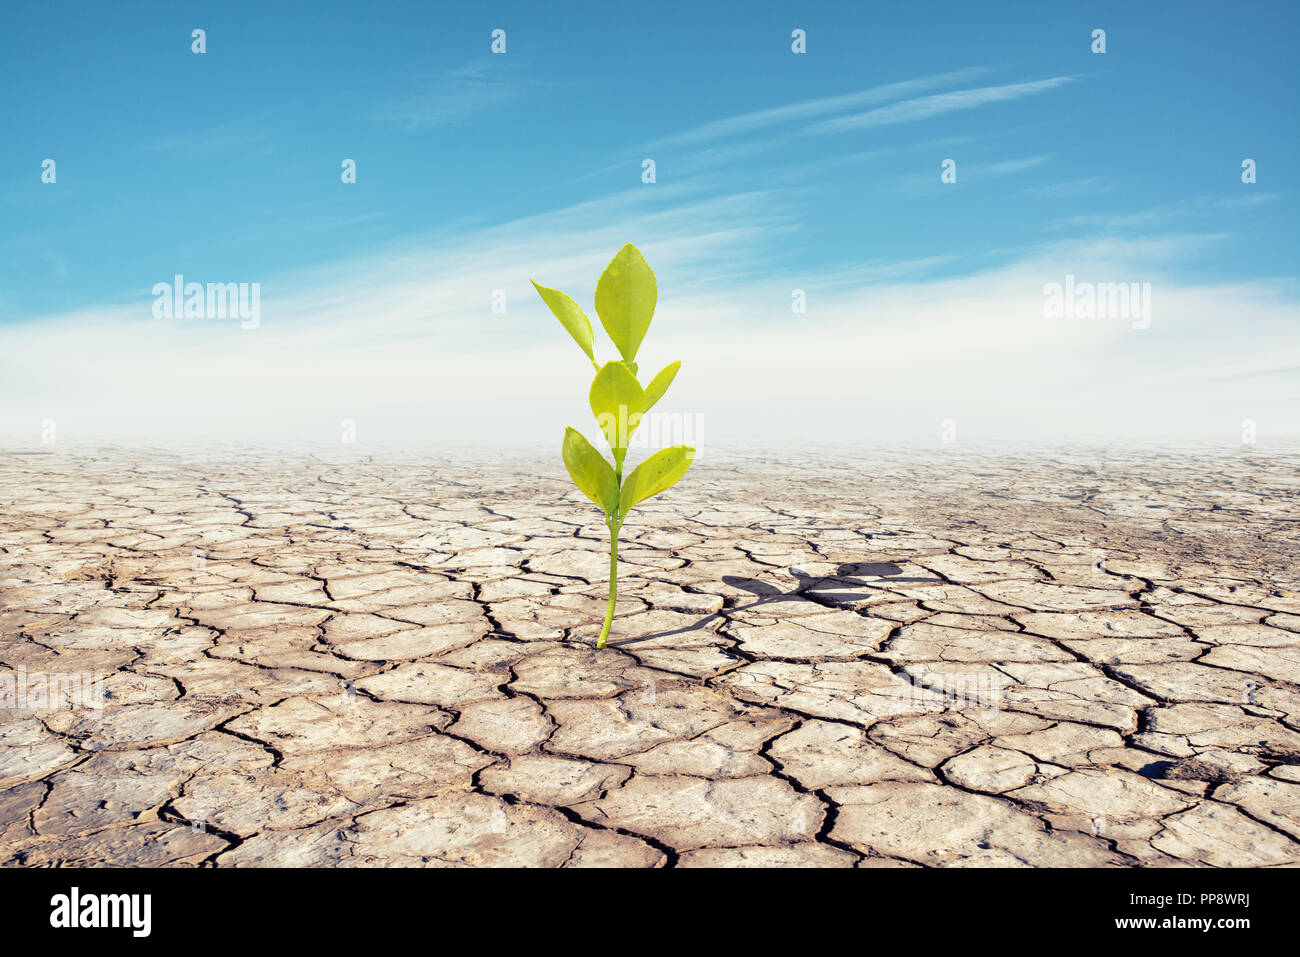 Death of cracked dry brown earth and lonely little green plant. Stock Photo